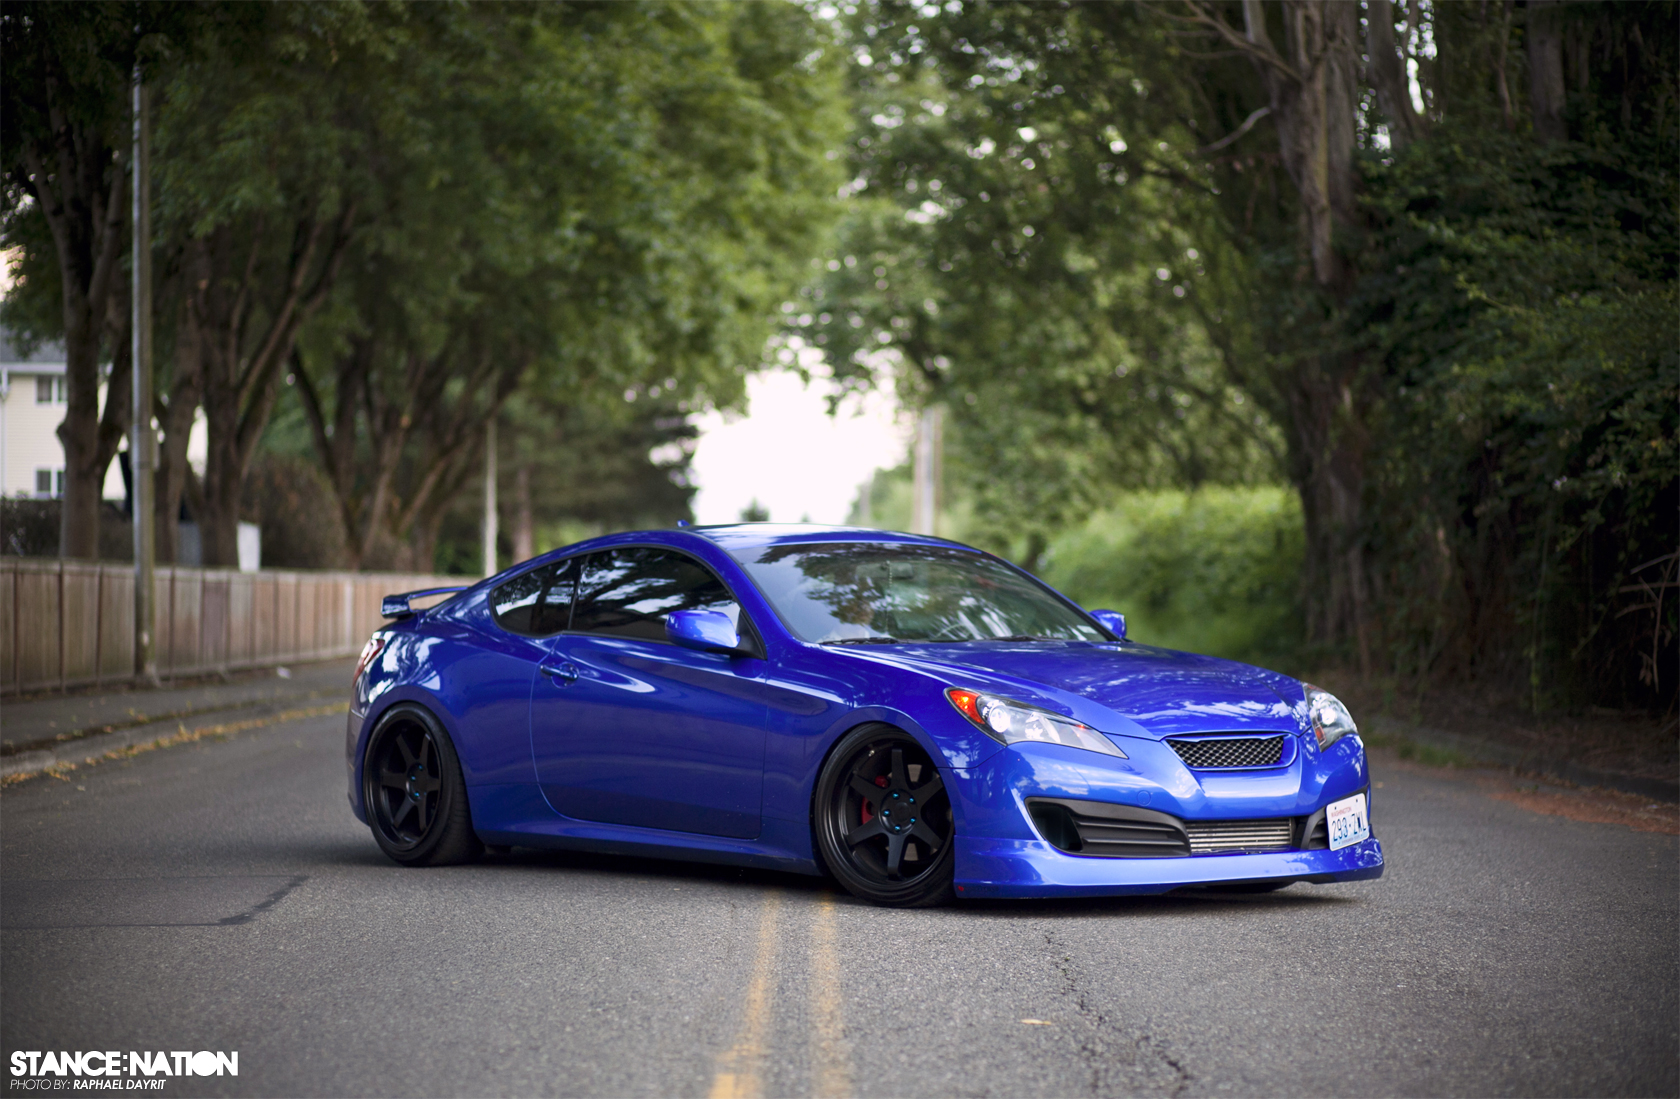 Something Fresh & Clean! | StanceNation™ // Form > Function